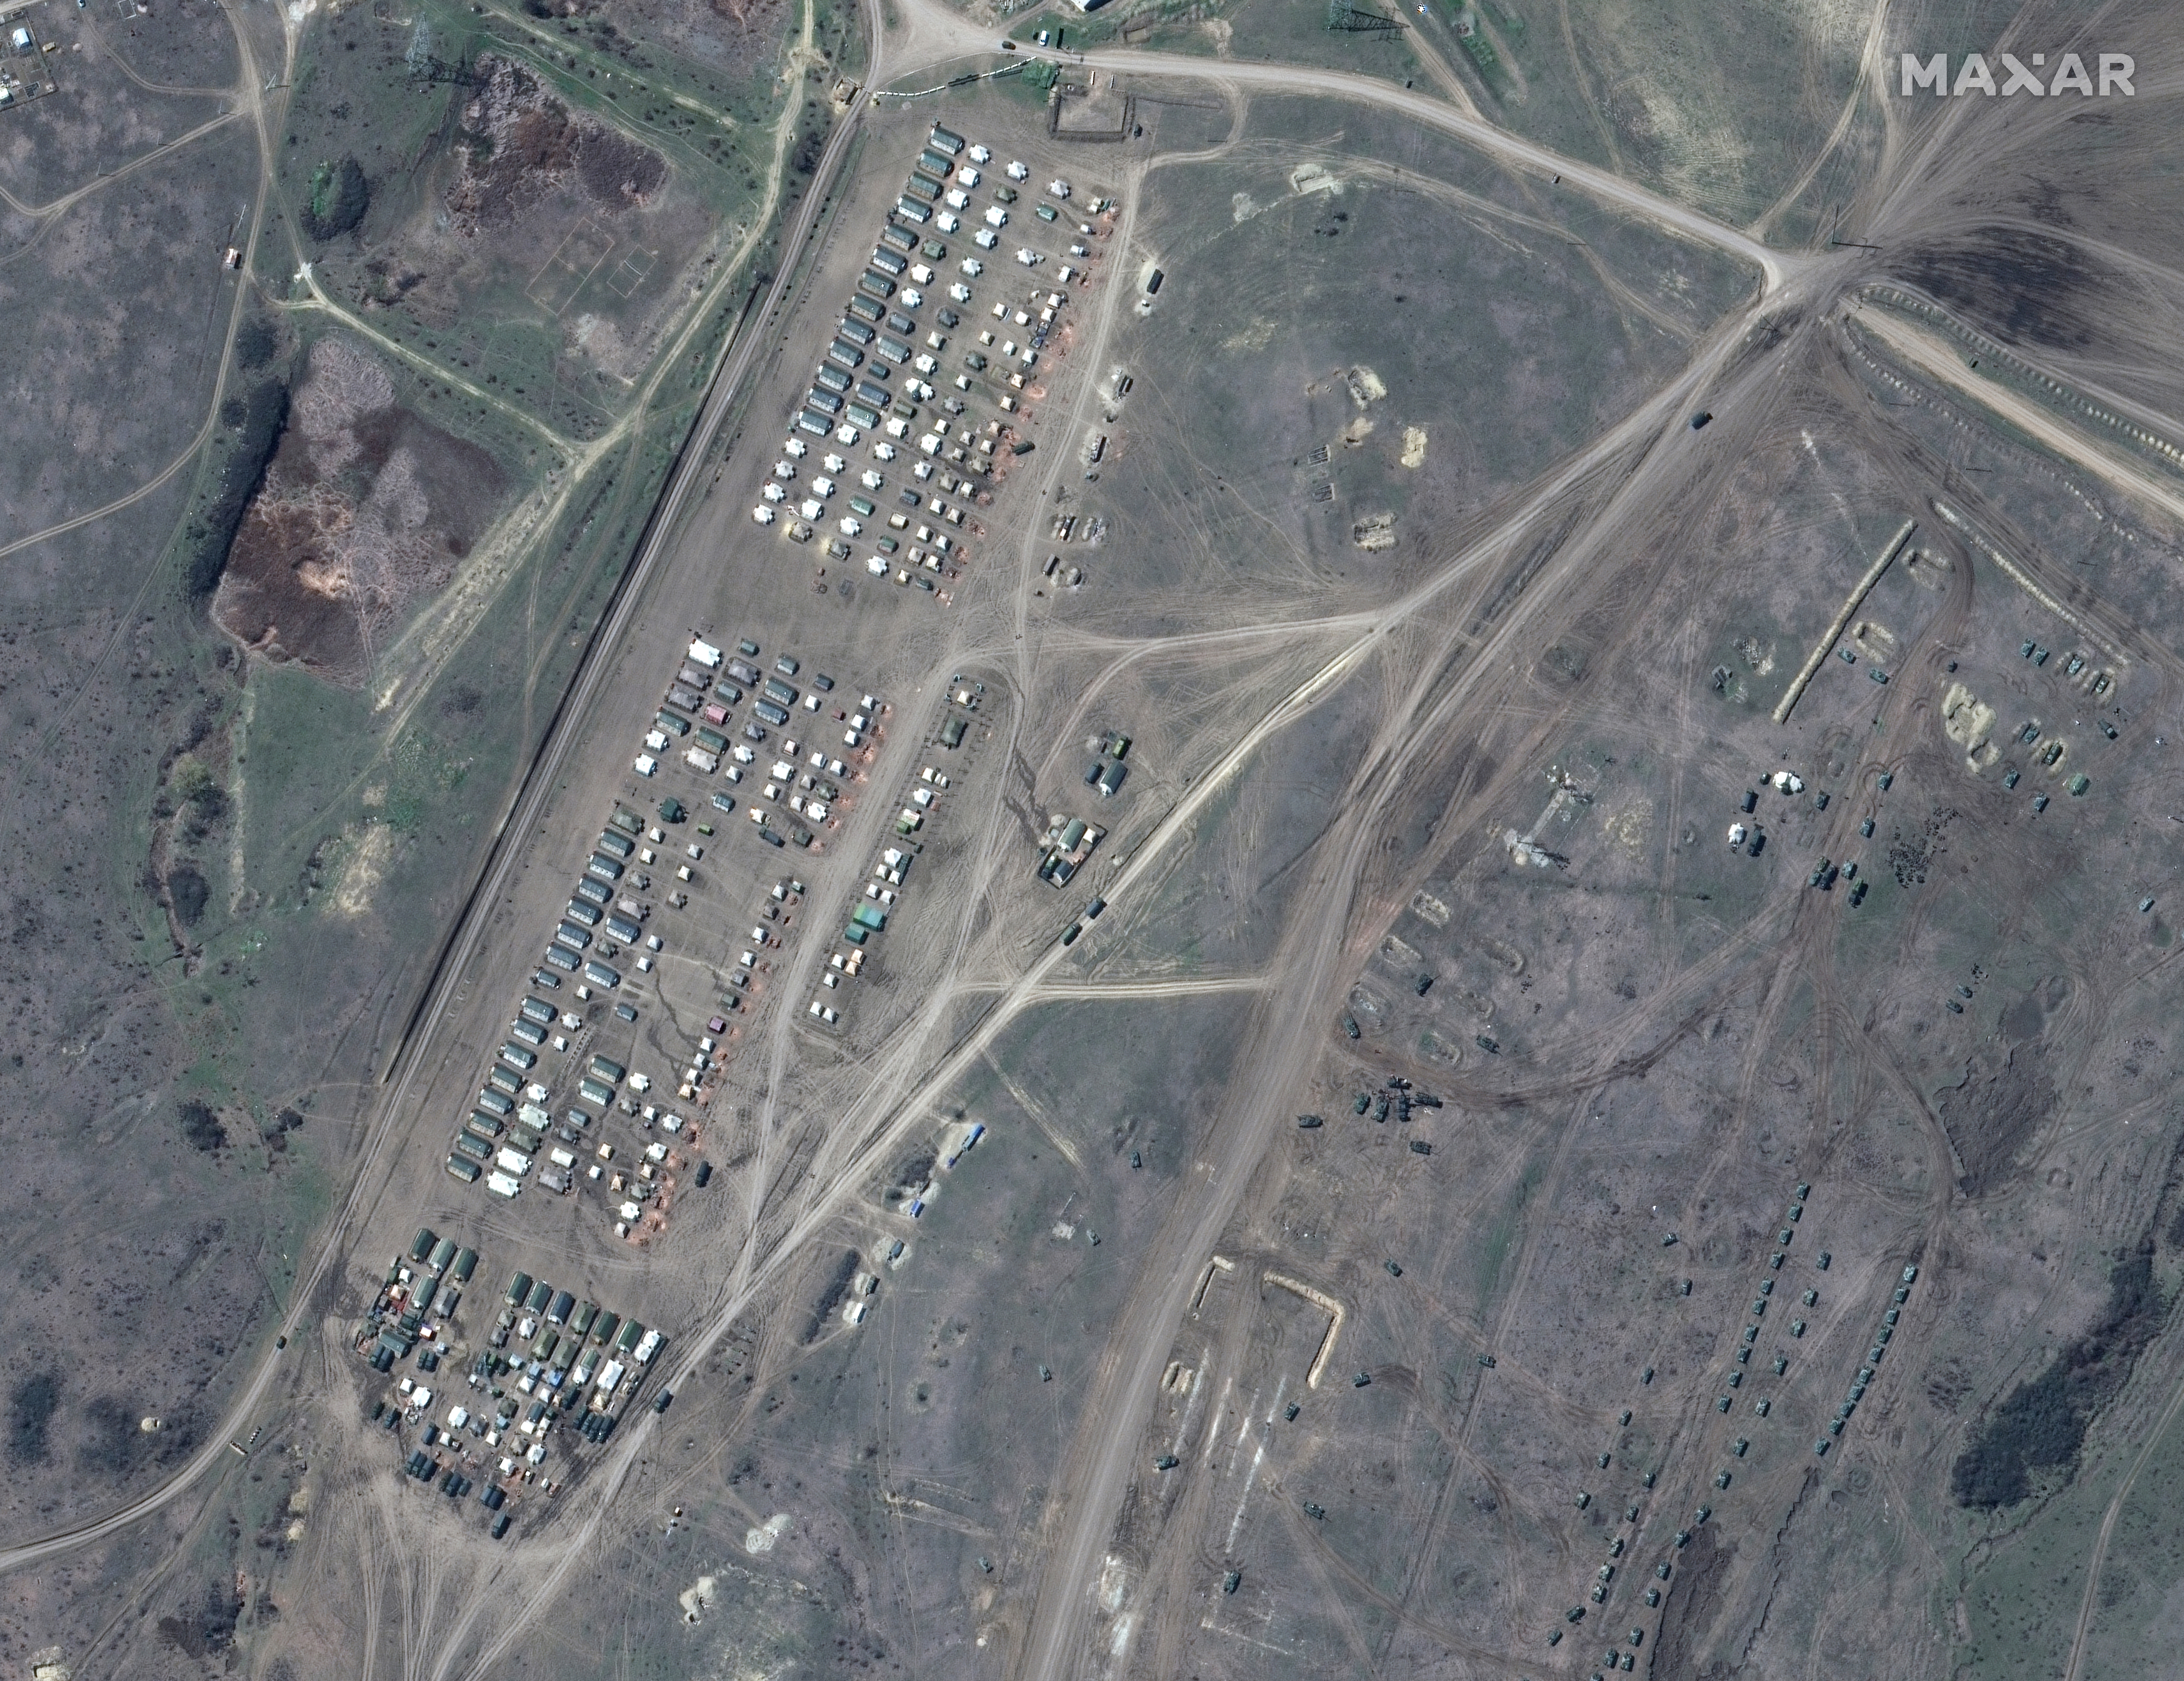 Commercial satellite companies provide views once reserved for governments, like this image of a Russian military training facility in Crimea. 